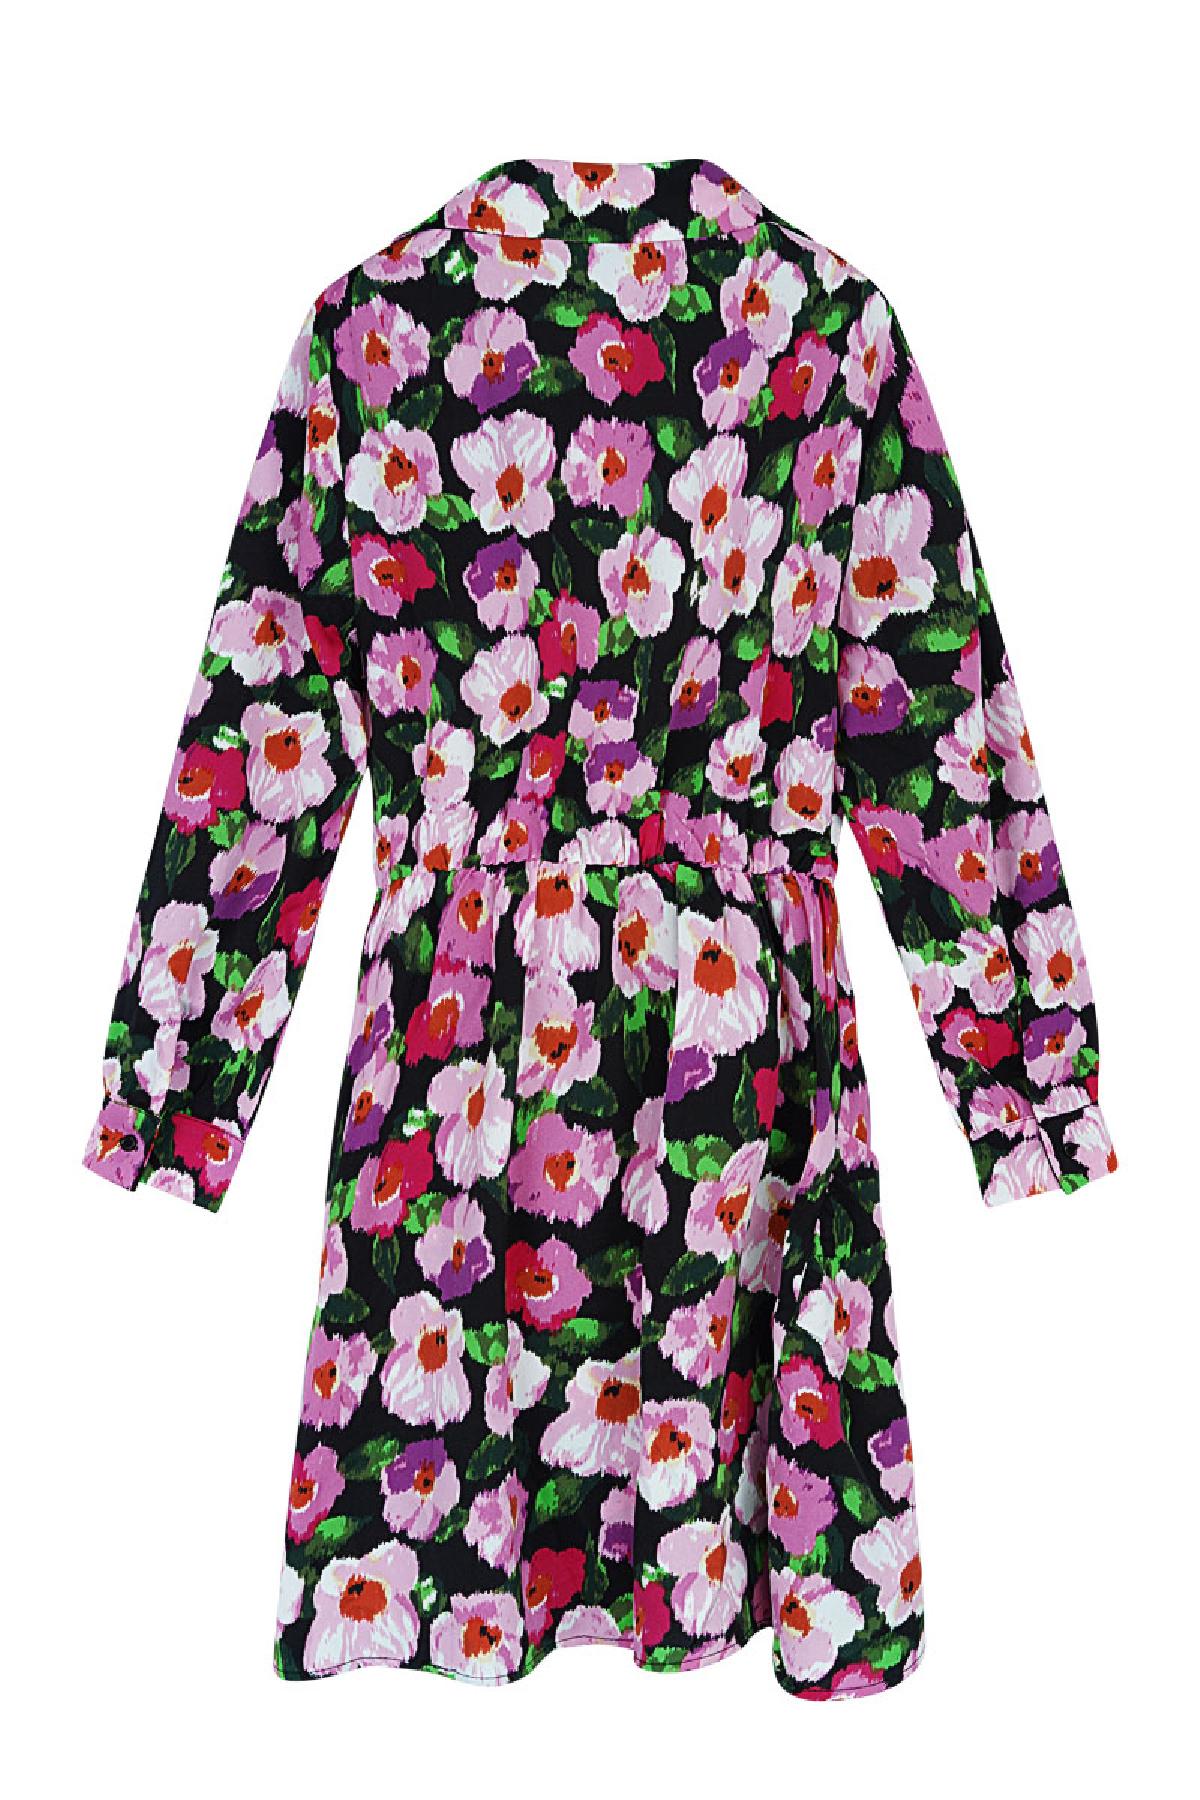 Flower print dress with button detail Black Multi M Picture3